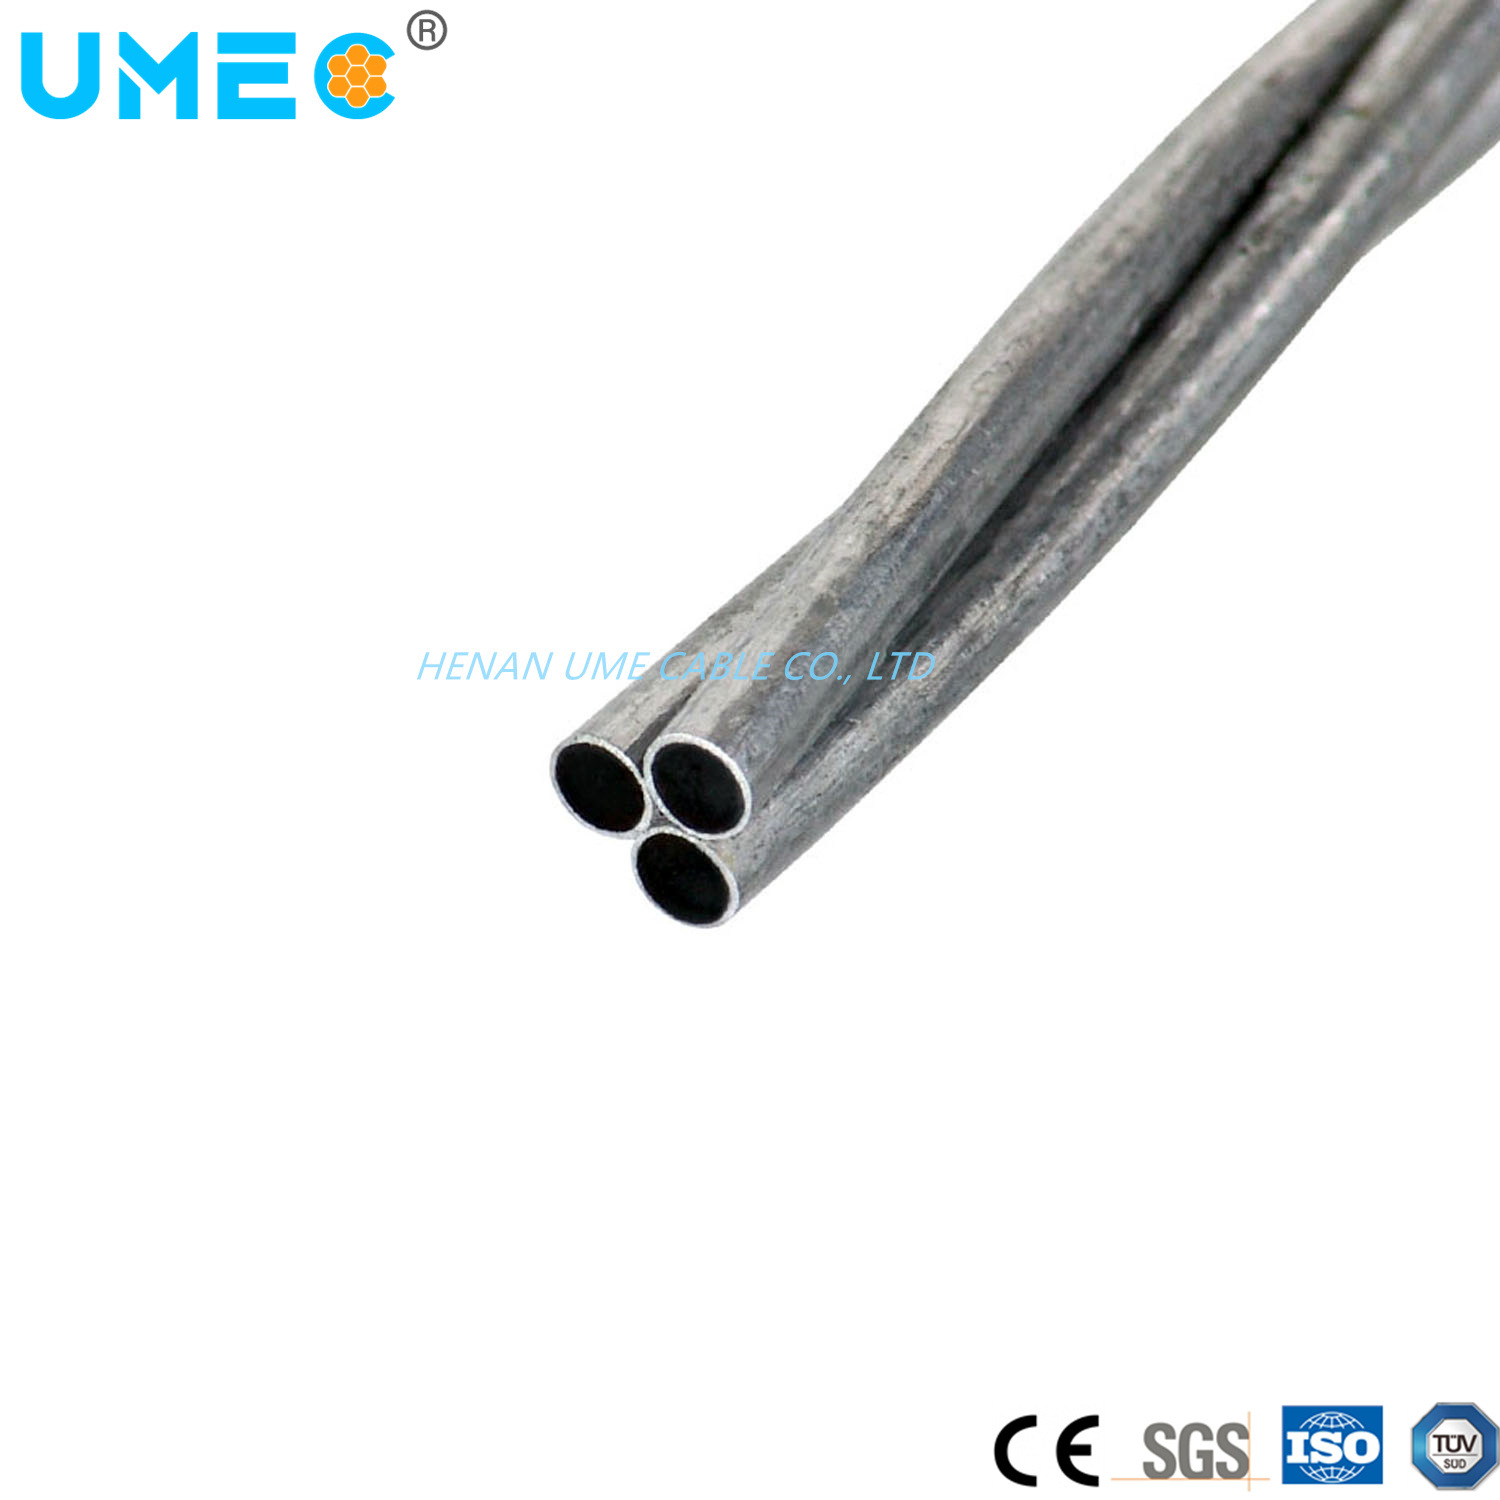 Wholesale Aacsr Overhead Electric Power Transmission Aluminum Alloy Conductor Steel Reinforced 240/40mm2 300/20mm2